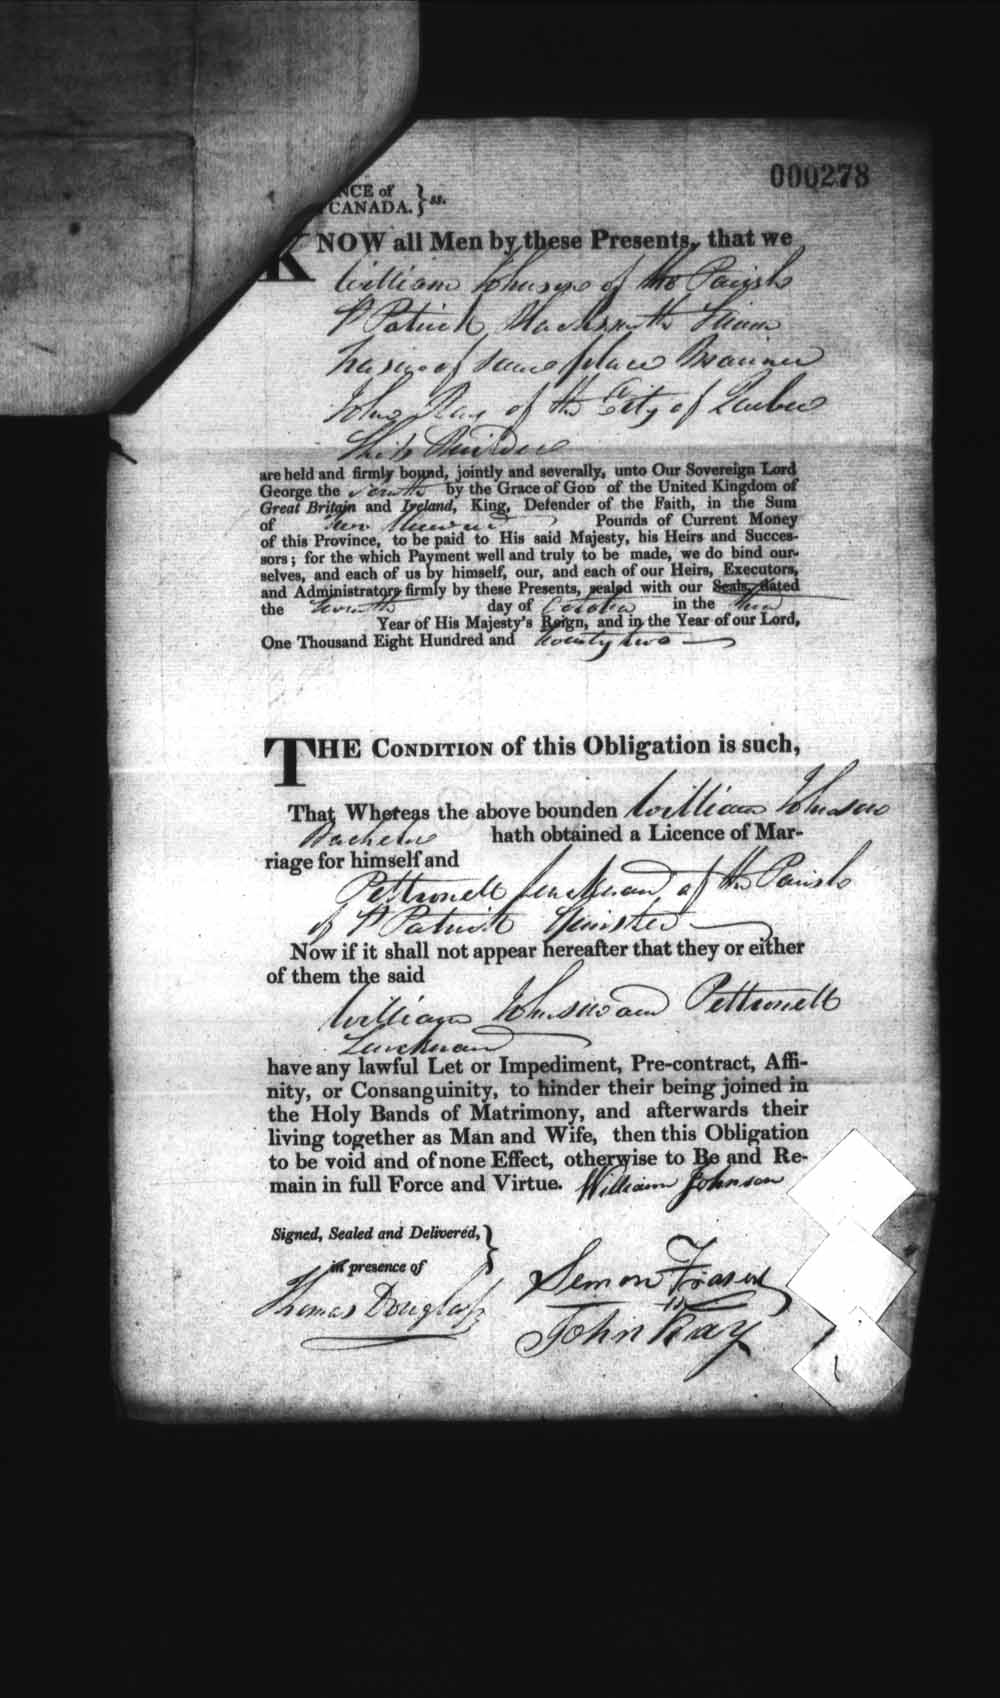 Digitized page of Upper and Lower Canada Marriage Bonds (1779-1865) for Image No.: e008236147